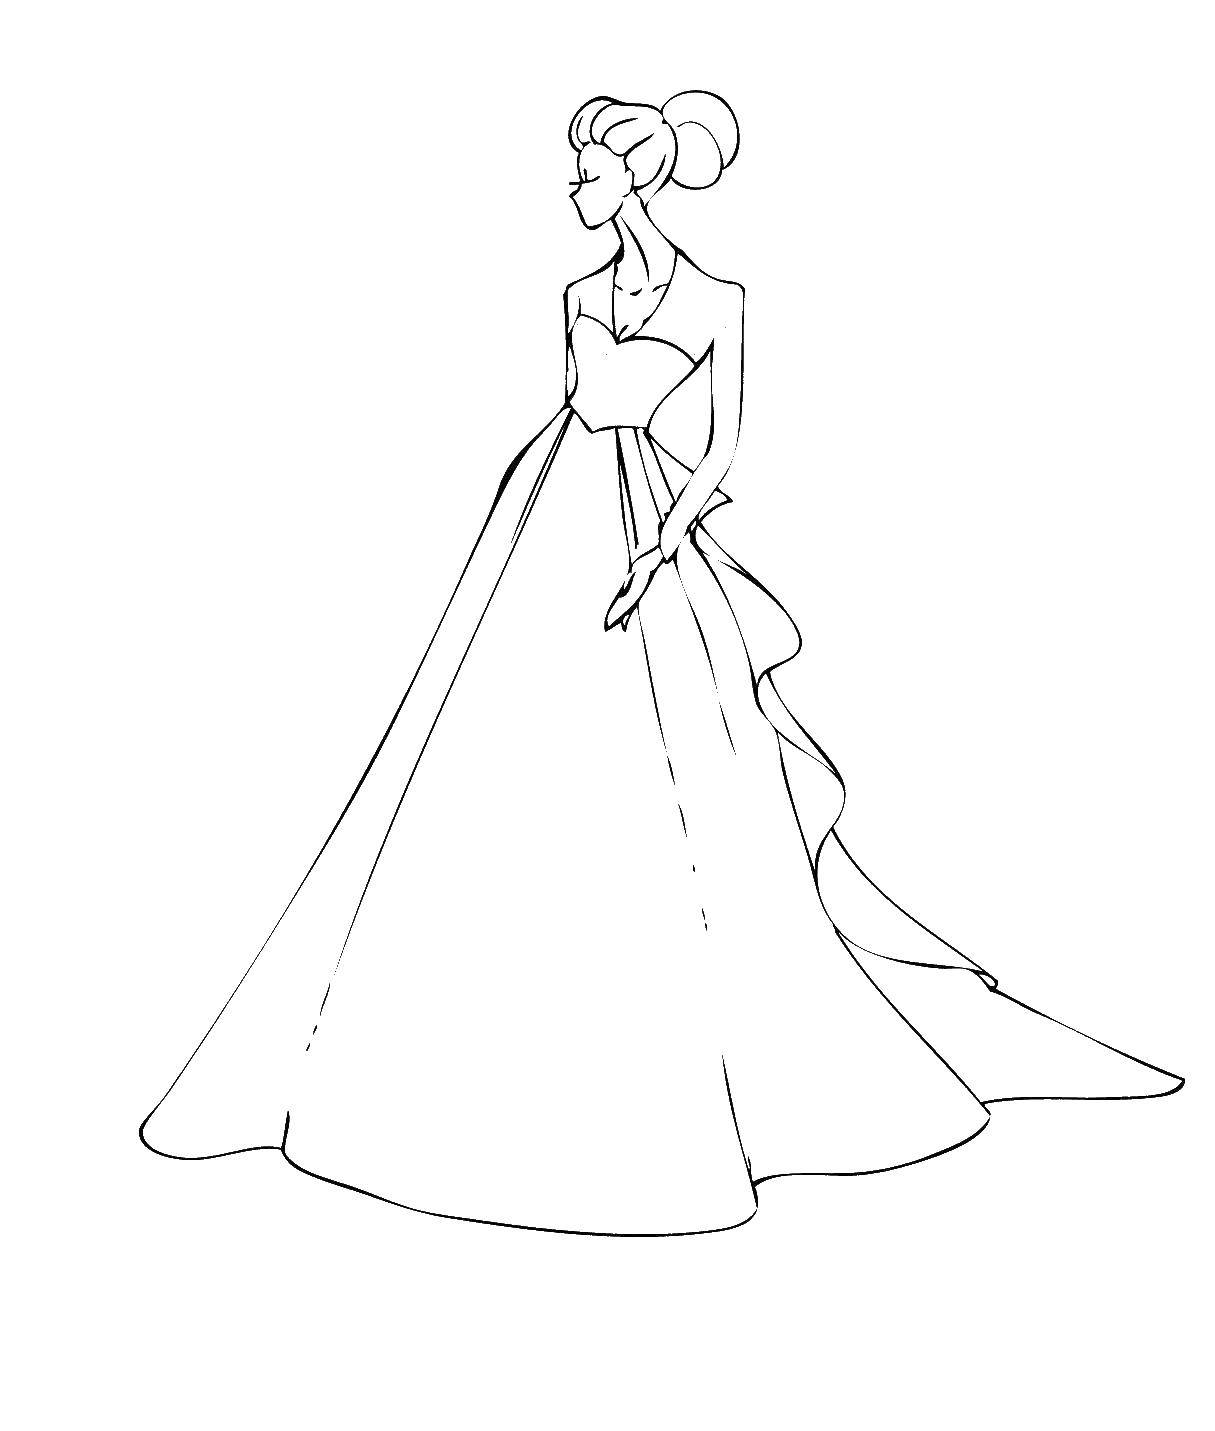 Coloring Girl in evening dress. Category Dress. Tags:  dress, clothes.